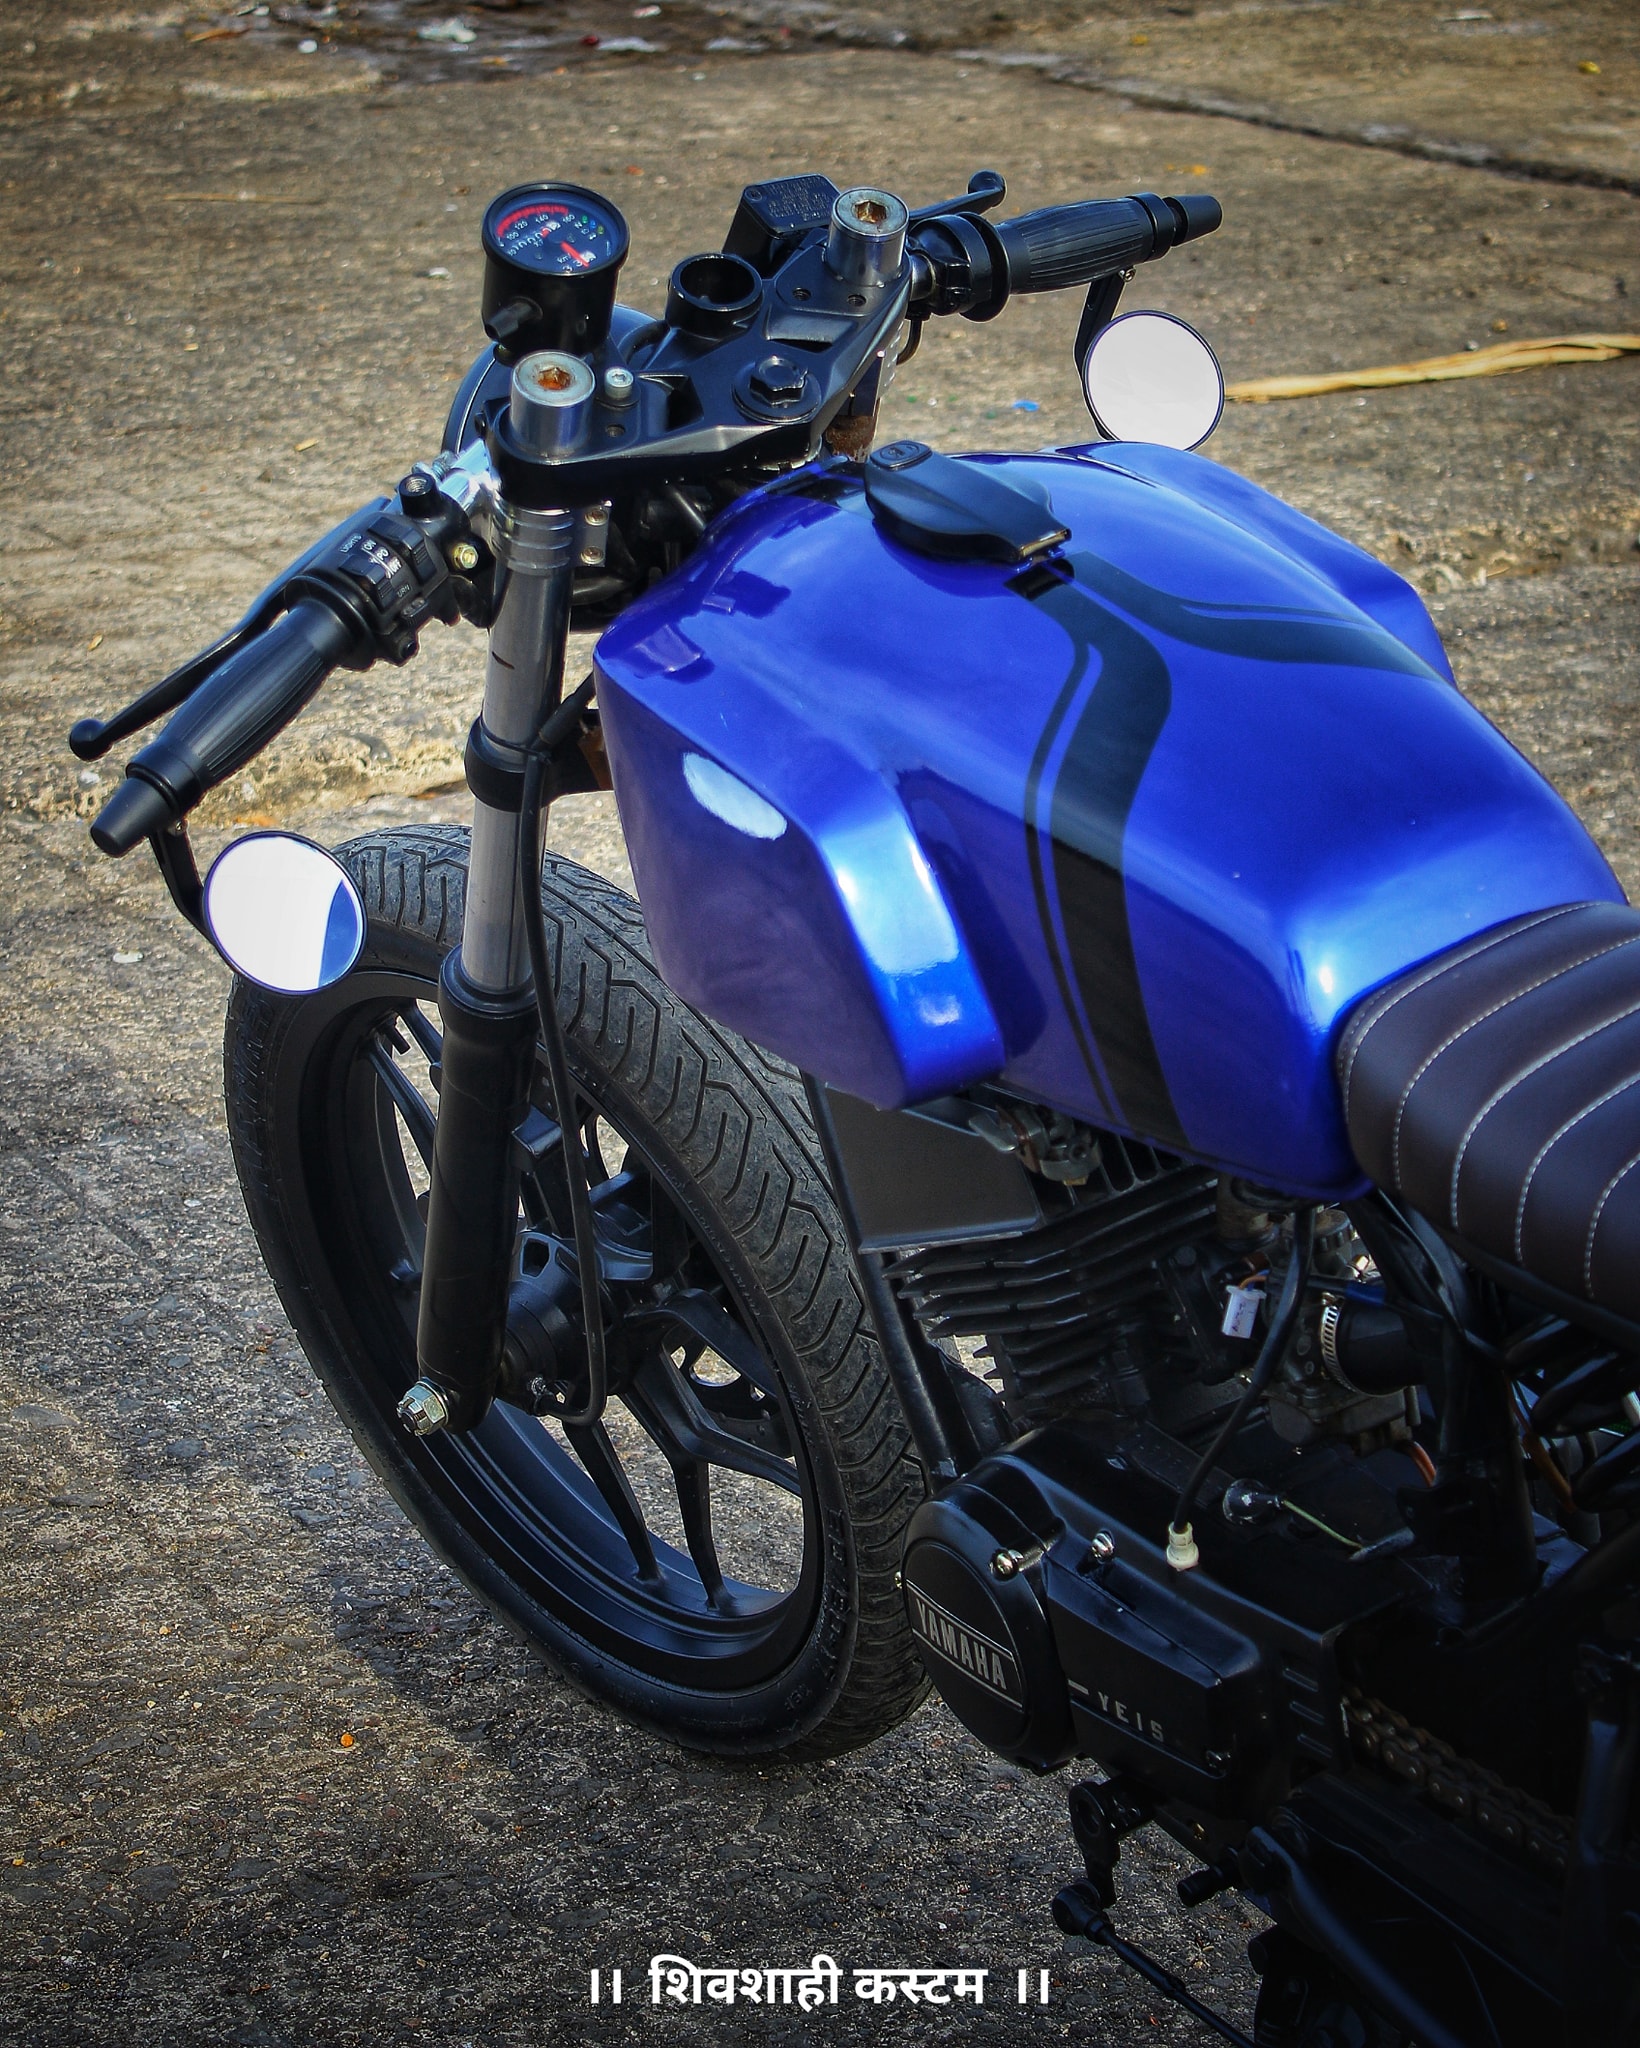 Perfectly Modified Yamaha RX135 Cafe Racer by Shivshahi Customs - background